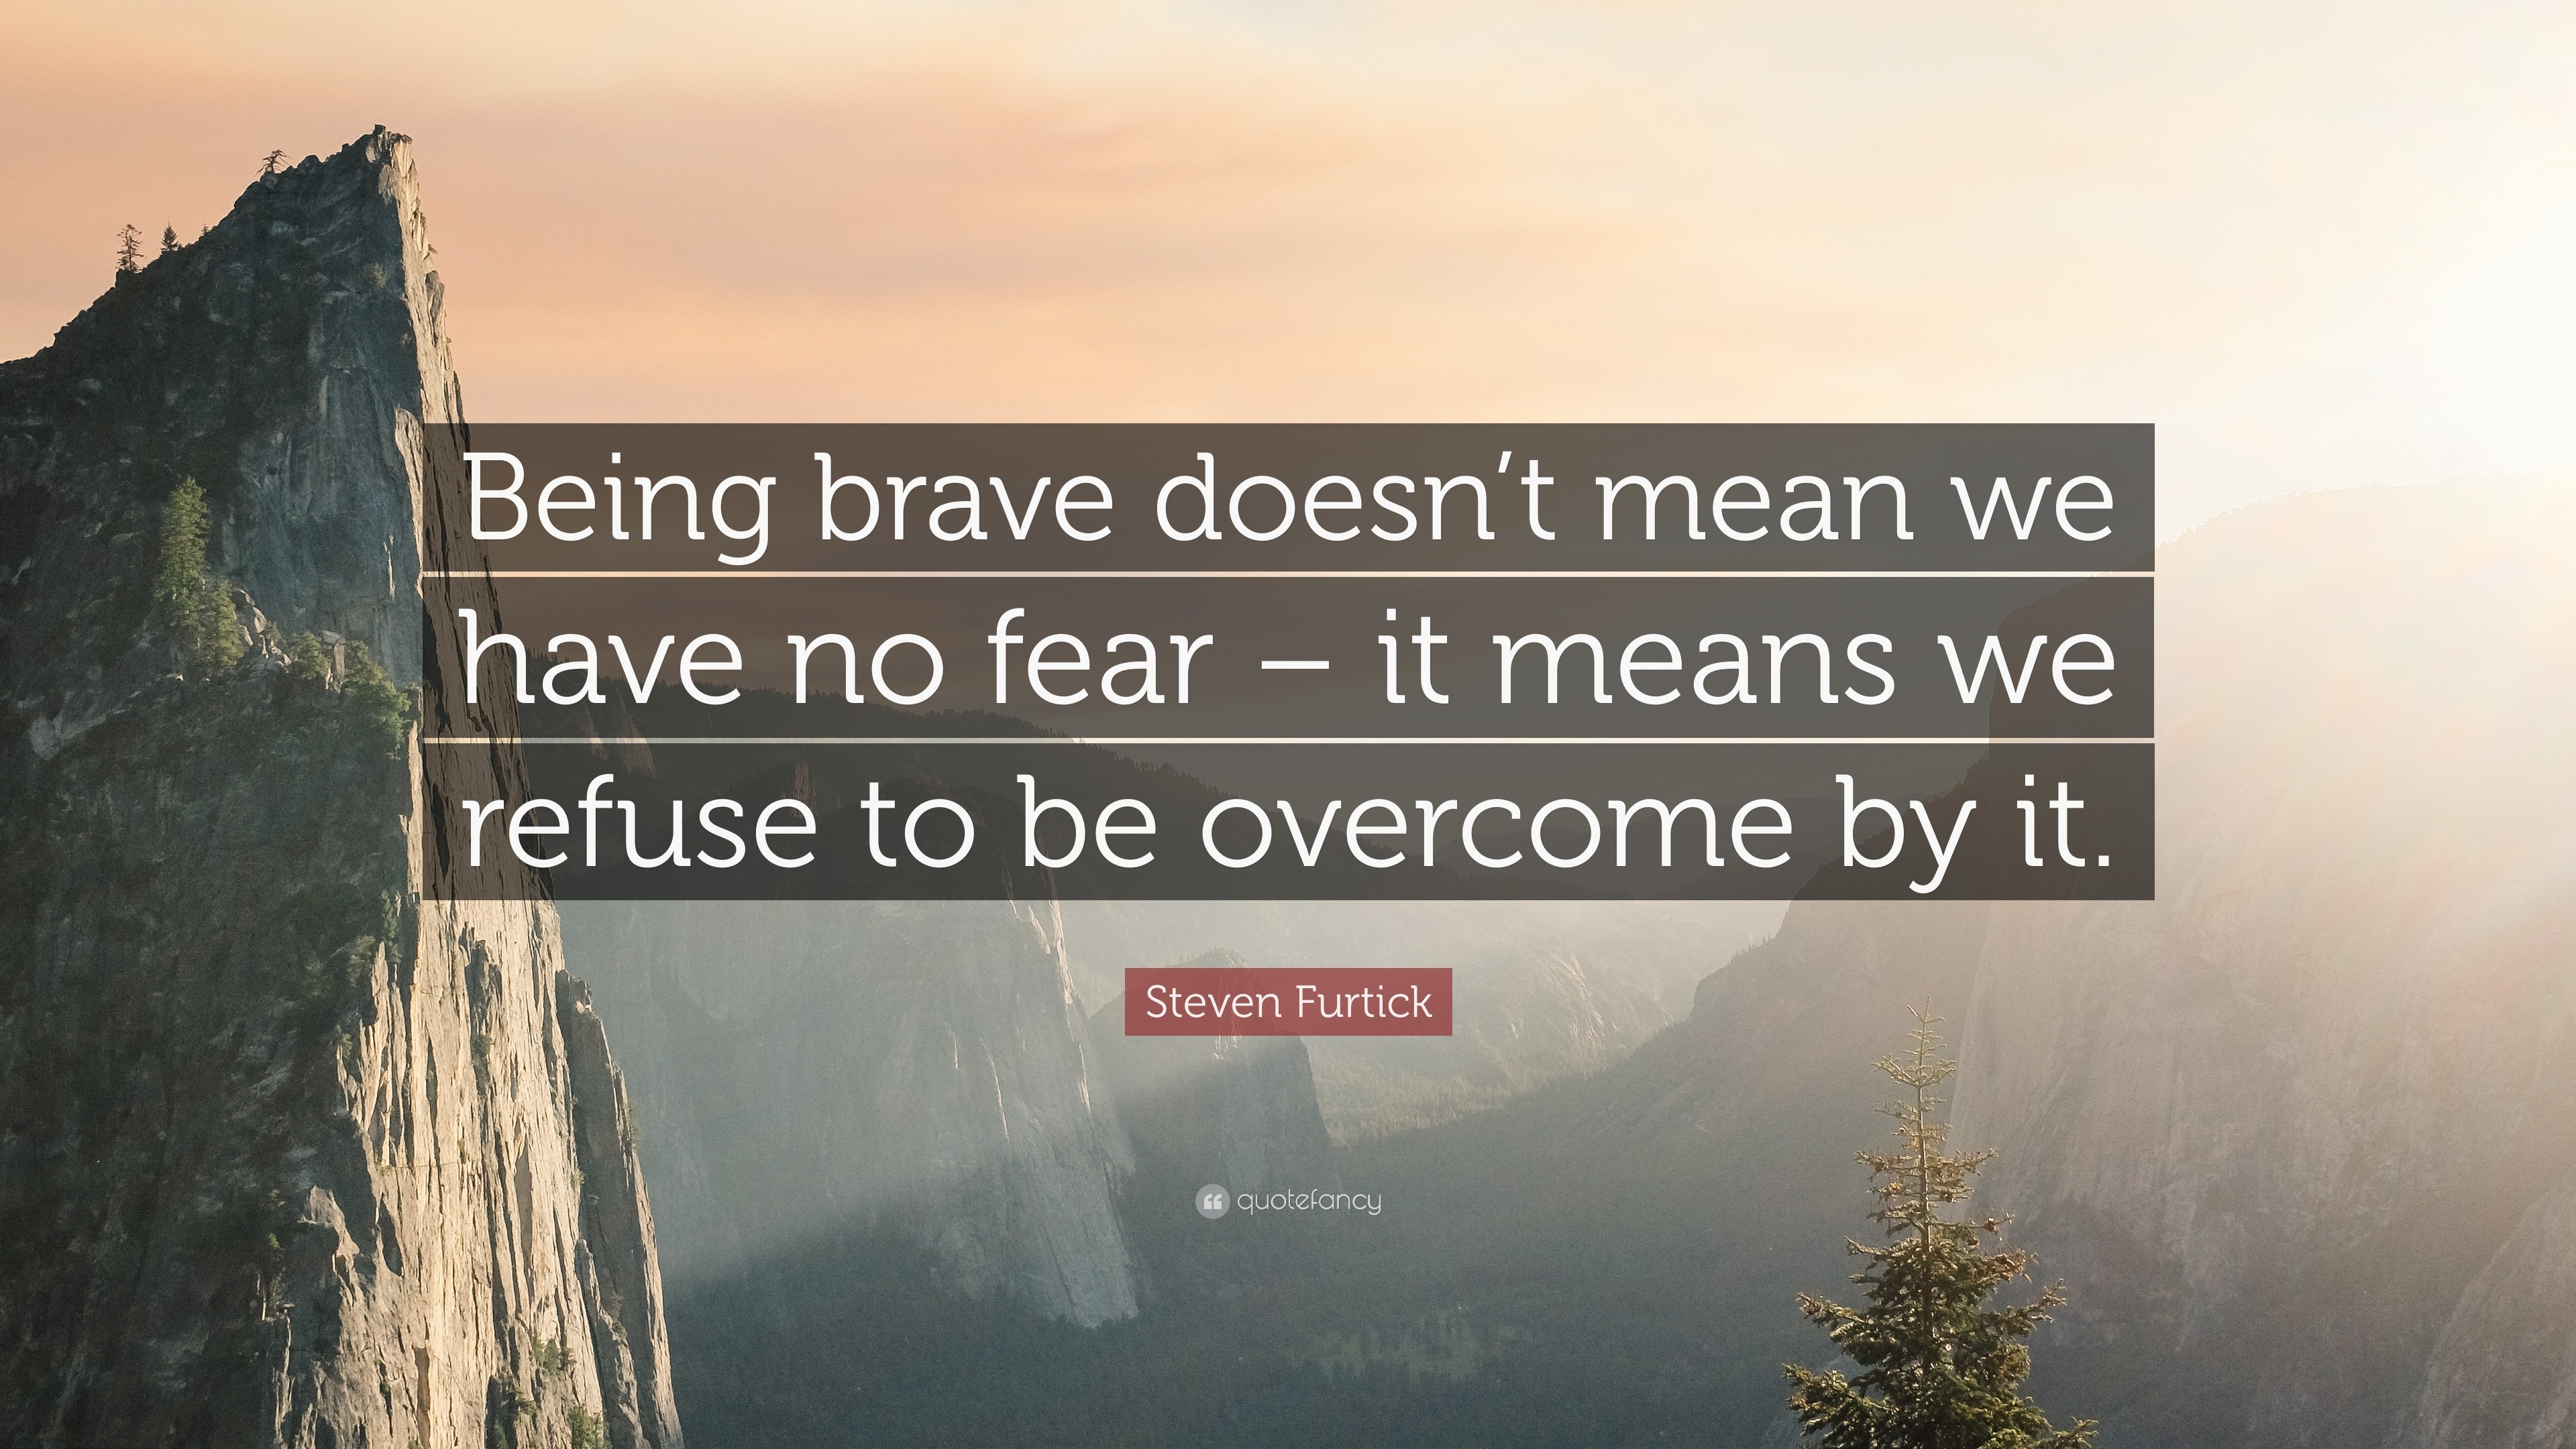 Steven Furtick Quote: “Being brave doesn't mean we have no fear ...